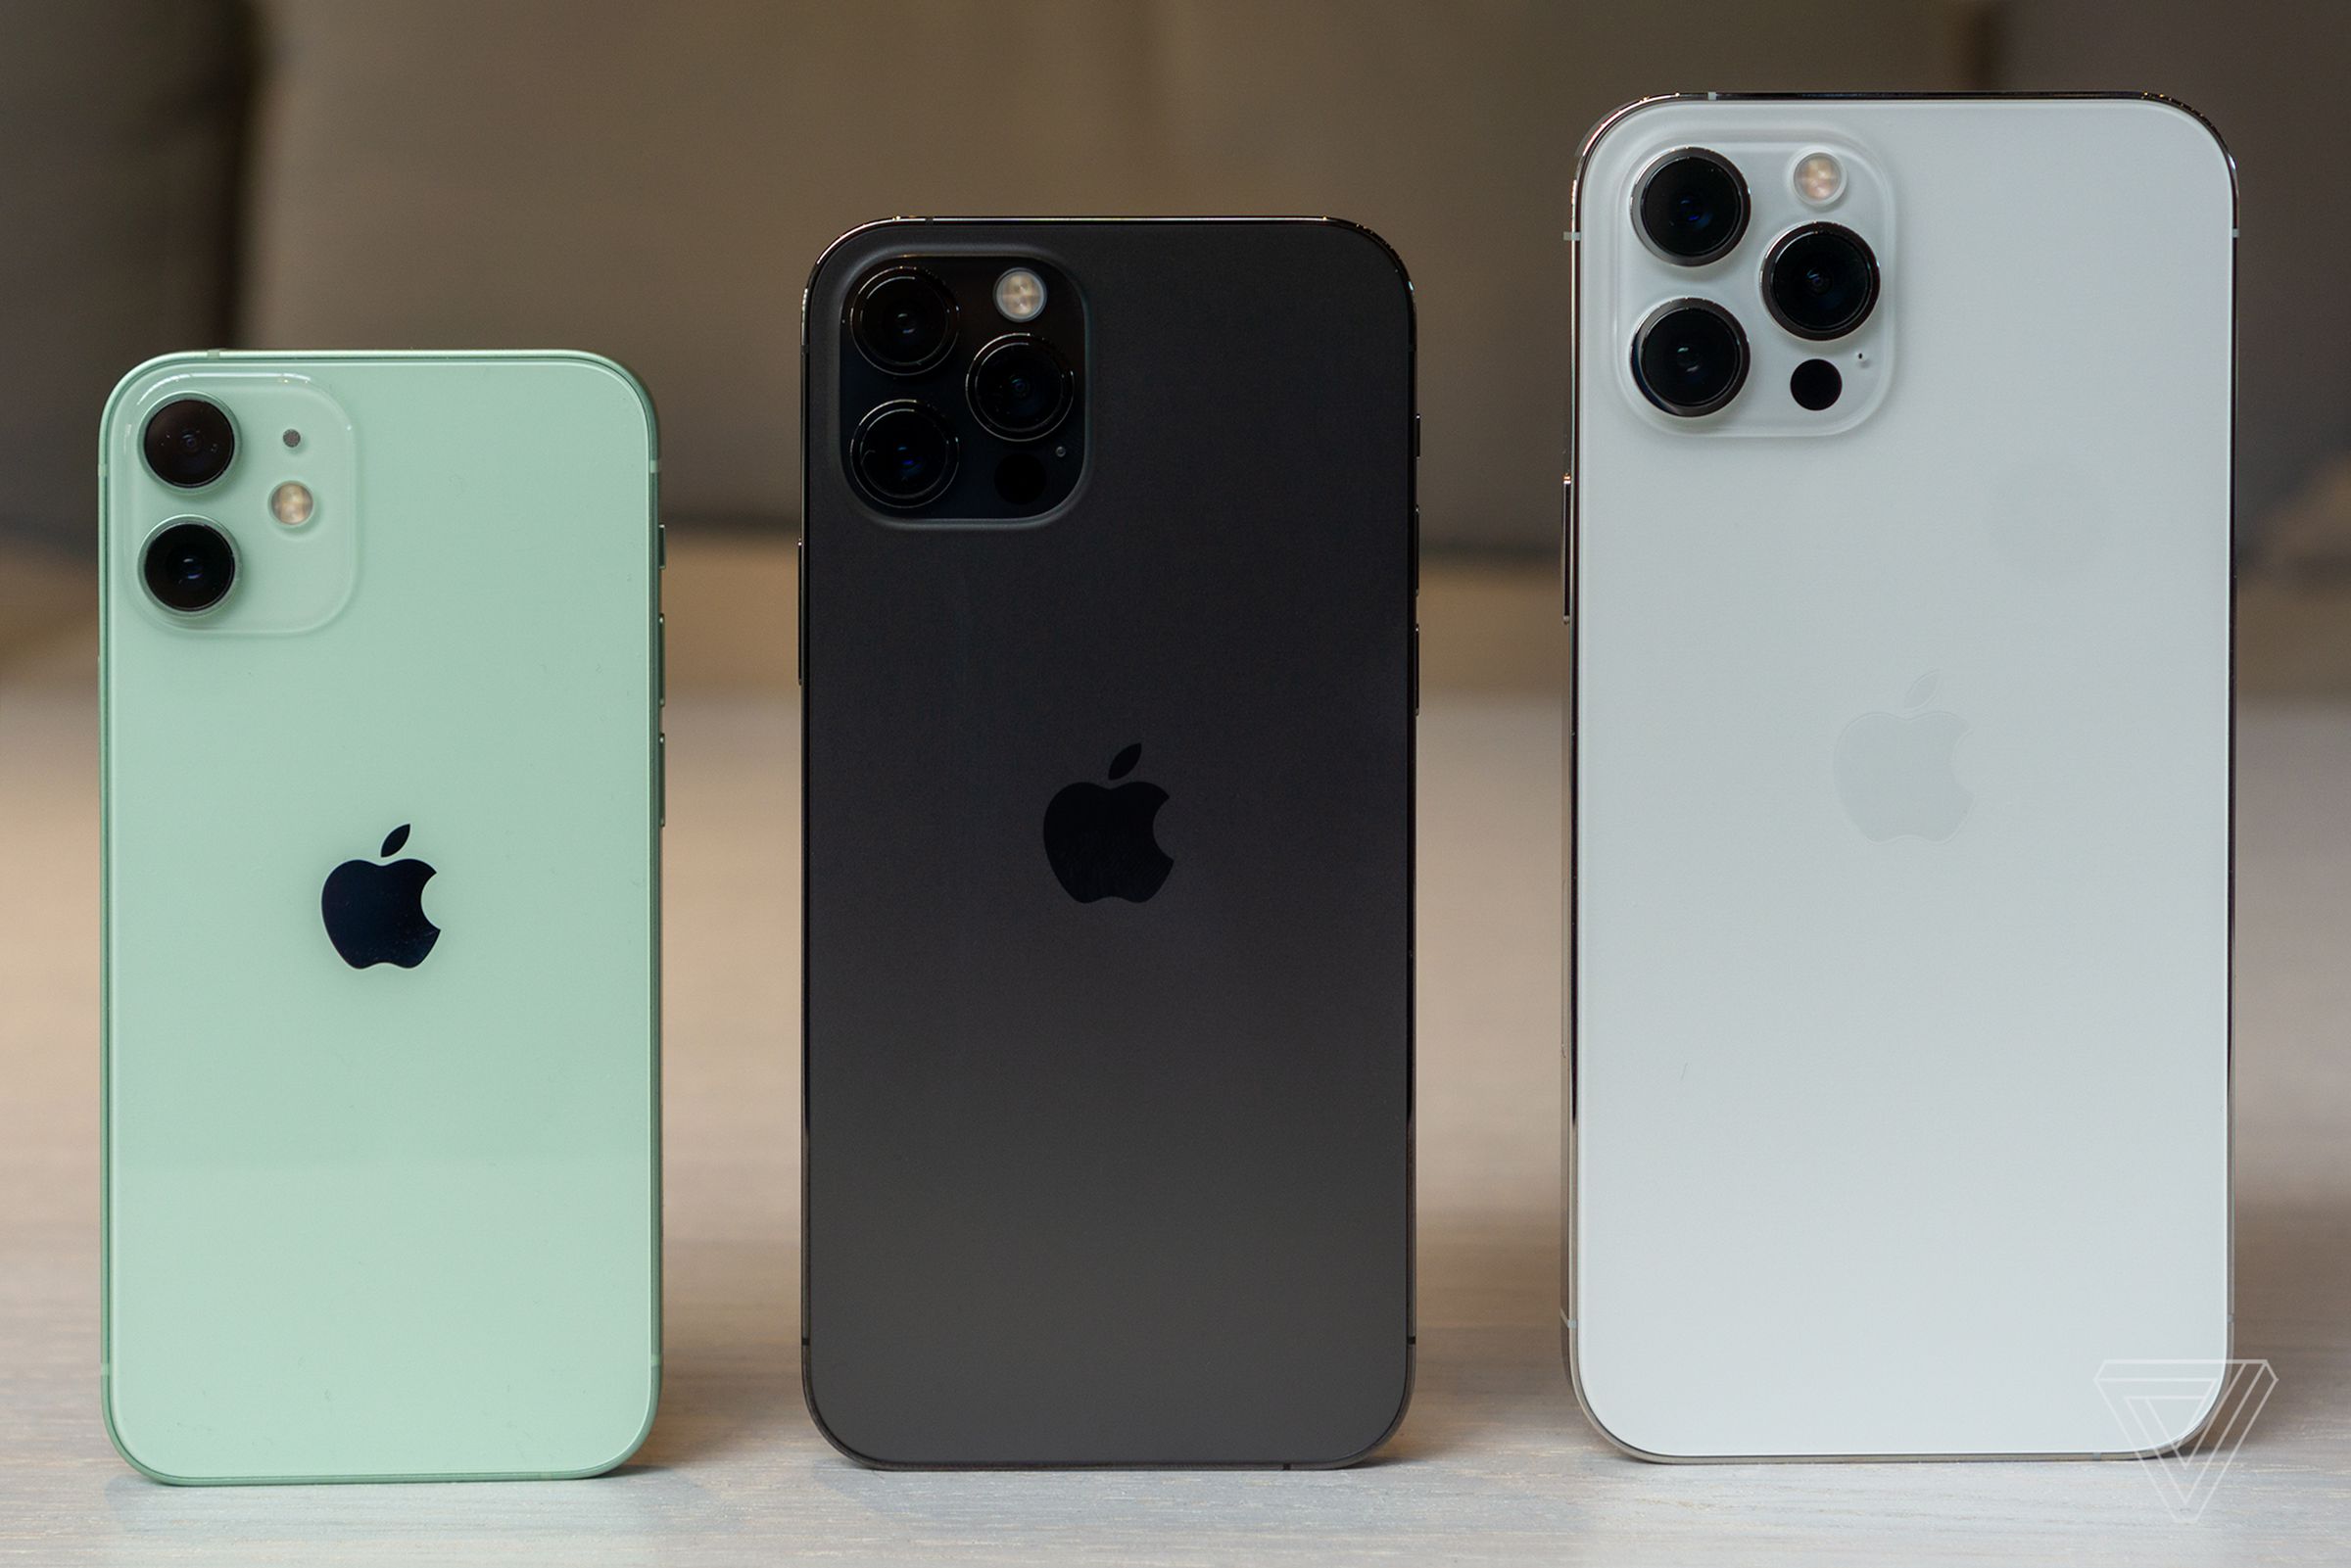 From left to right: the iPhone 12 mini, iPhone 12 Pro, iPhone 12 Pro Max.